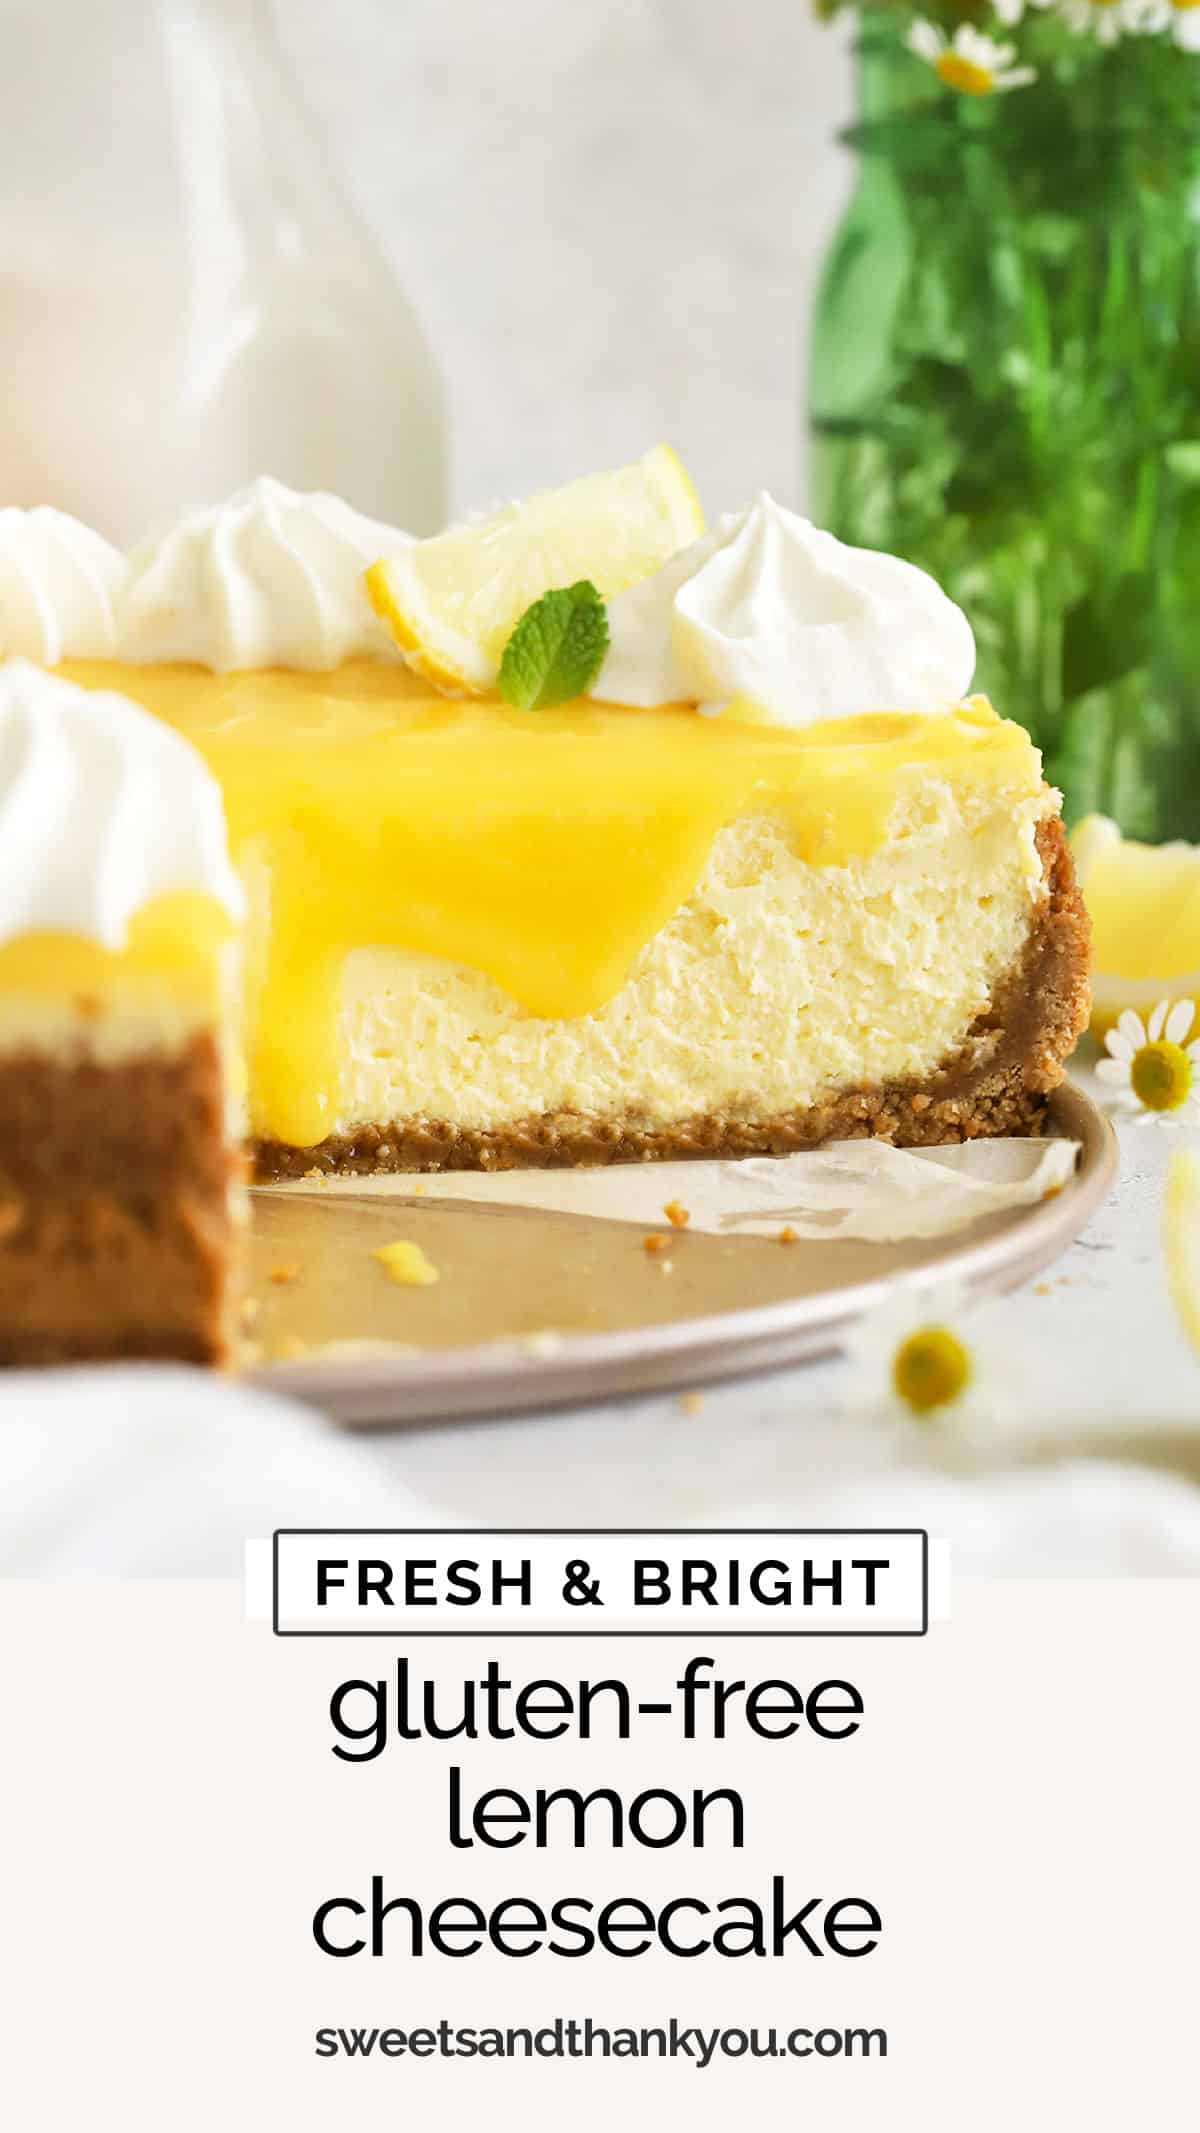 Our Gluten-Free Lemon Cheesecake recipe is the perfect lemon dessert recipe for lemon lovers! A buttery graham cracker crust, luscious lemon filling, zesty lemon curd, and fluffy whipped cream make each bite delicious! This gluten-free cheesecake recipe is the perfect spring dessert for Easter or Mother's Day, or makes an impressive Thanksgiving or holiday dessert. You won't want to miss it! 